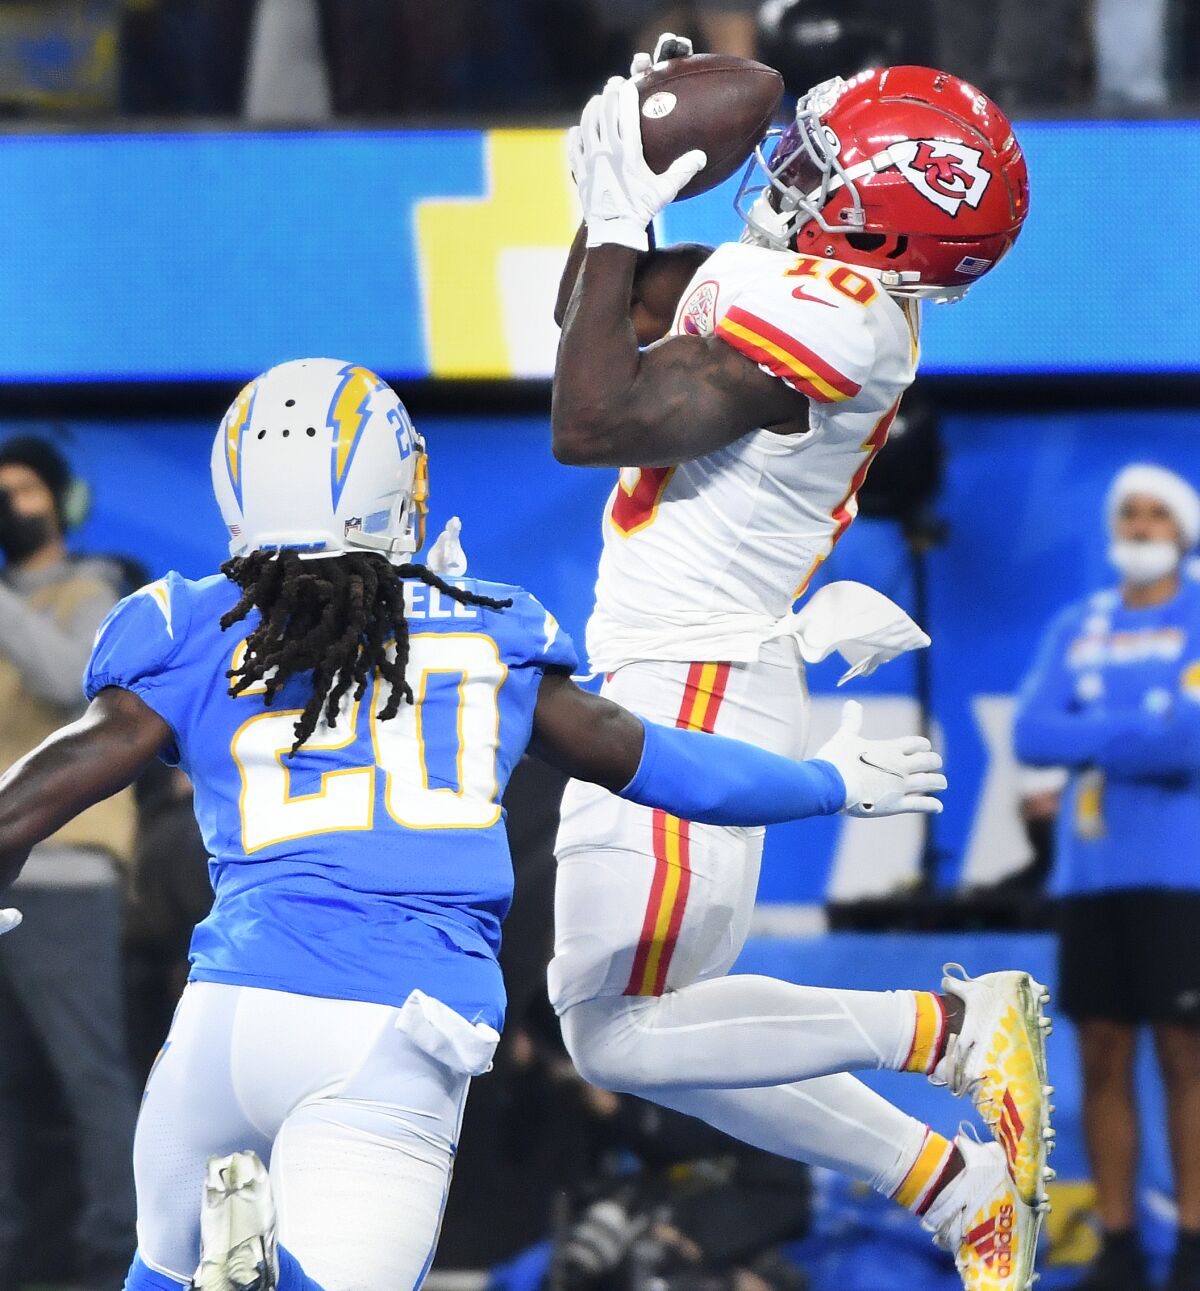 Chiefs receiver Tyreek Hill catches a touchdown pass in front of Chargers cornerback Tevaughn Campbell.